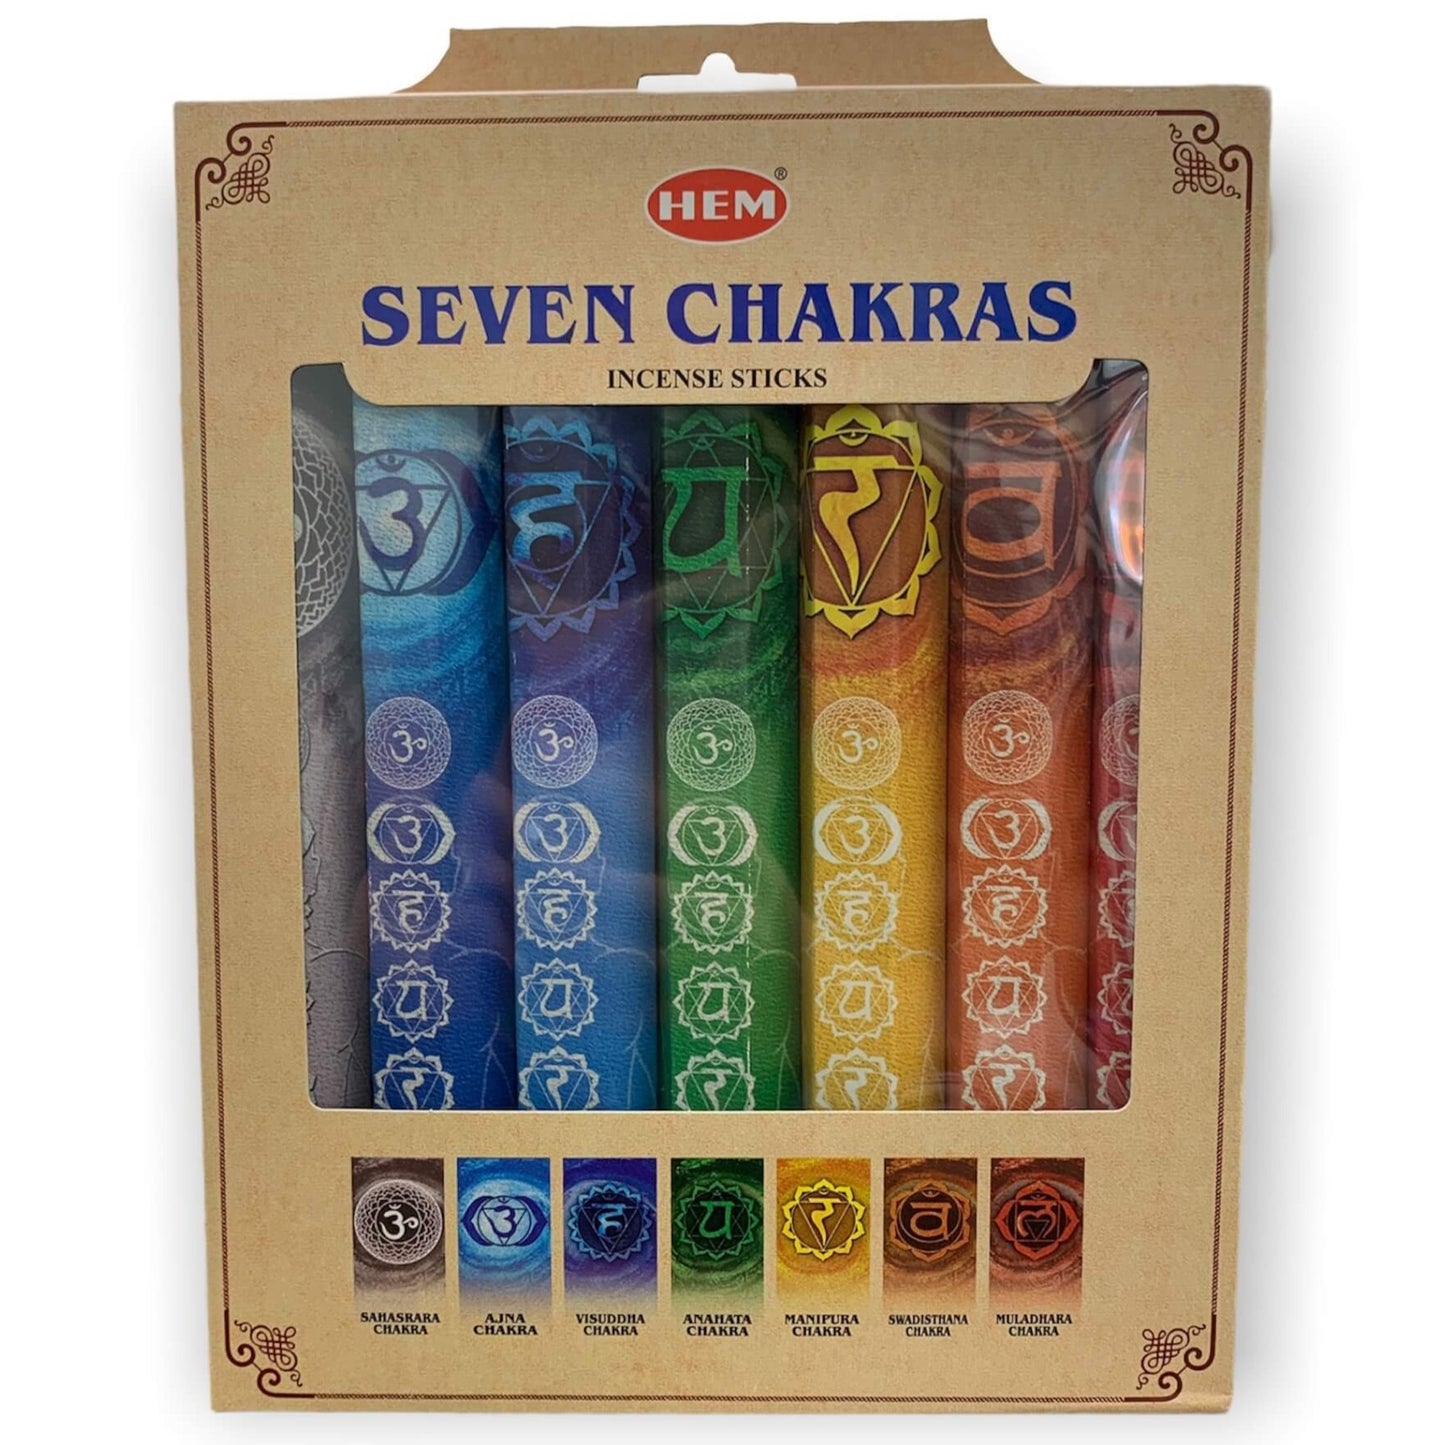 Shop Seven Chakras Incense with Deluxe Boxed Gift Set at Magic crystals. 7 Chakra Incense is perfect for people who meditate, practice yoga as it stimulates the body's energetic centers known as “chakras”. Free Shipping Available. Hem is known throughout the world for producing traditional incenses.